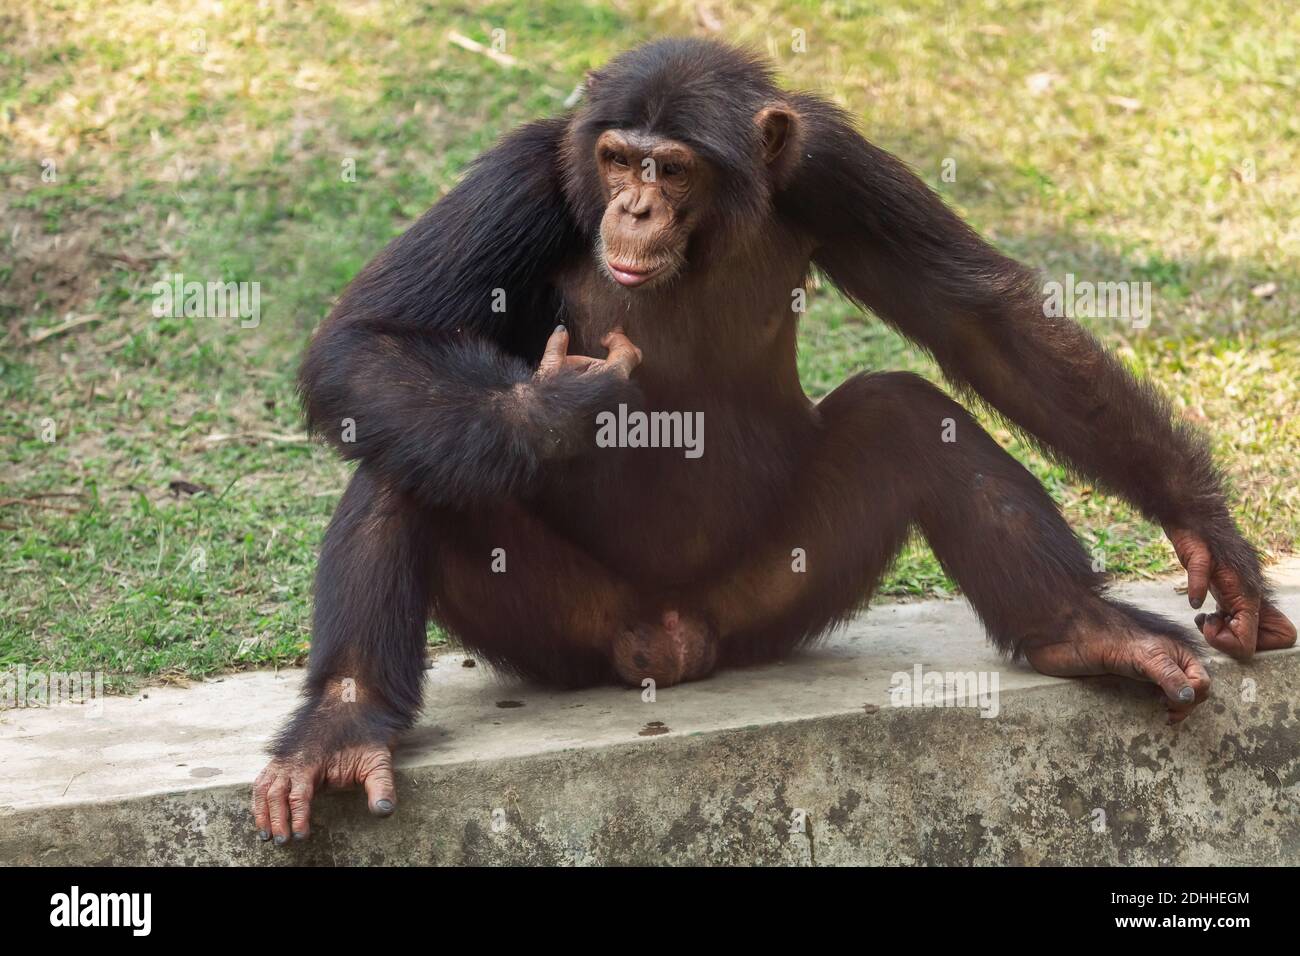 Chimpanzee ape in close up portrait view shot at an Indian animal sanctuary Stock Photo